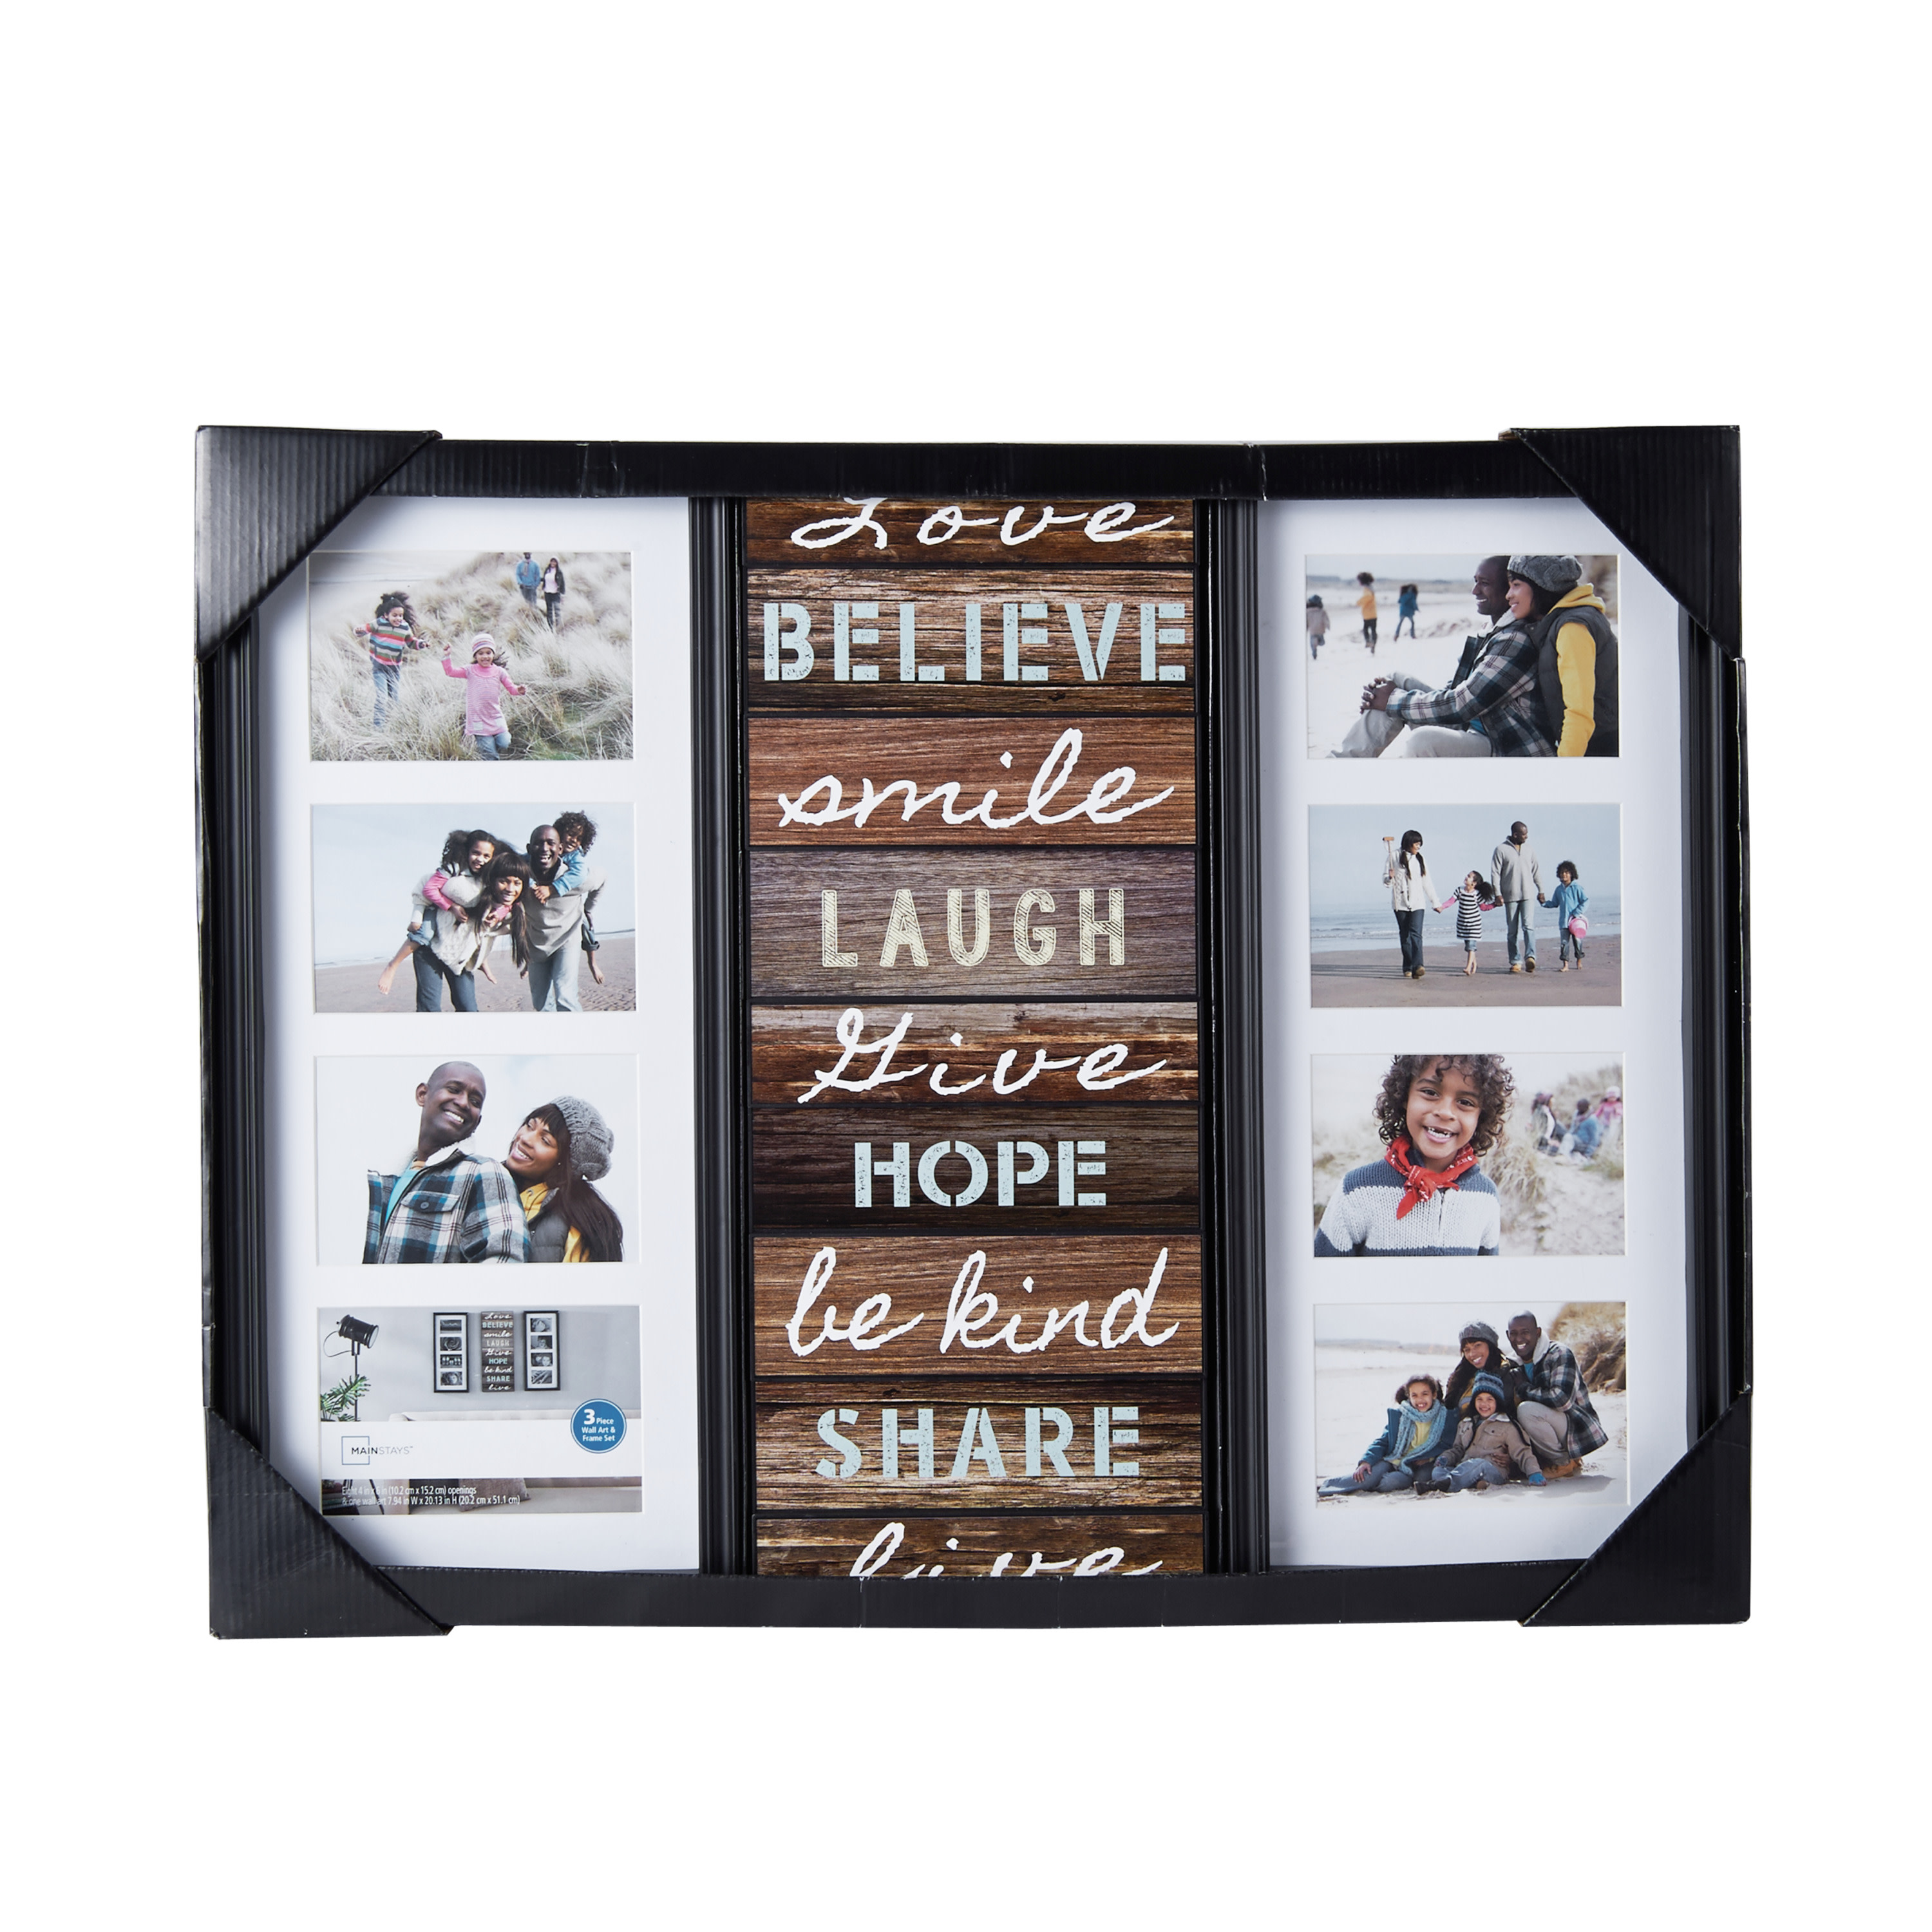 Mainstays Collage Picture Frames with Sentiment Plaque in Black (2 Frames and a Sentiment Wall Decor) - image 3 of 5